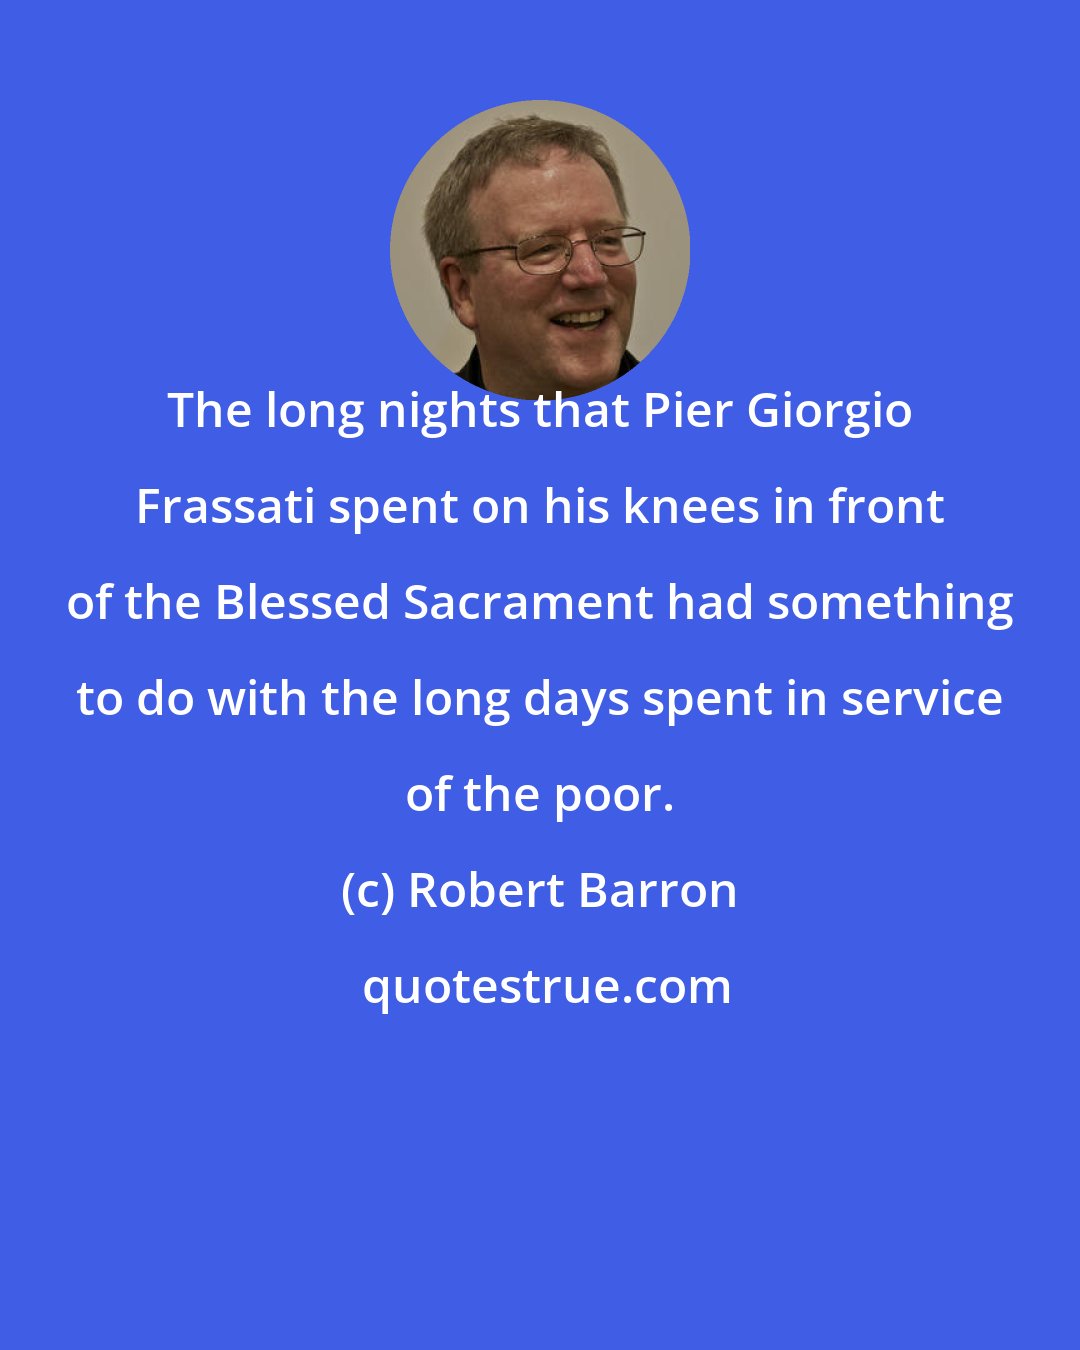 Robert Barron: The long nights that Pier Giorgio Frassati spent on his knees in front of the Blessed Sacrament had something to do with the long days spent in service of the poor.